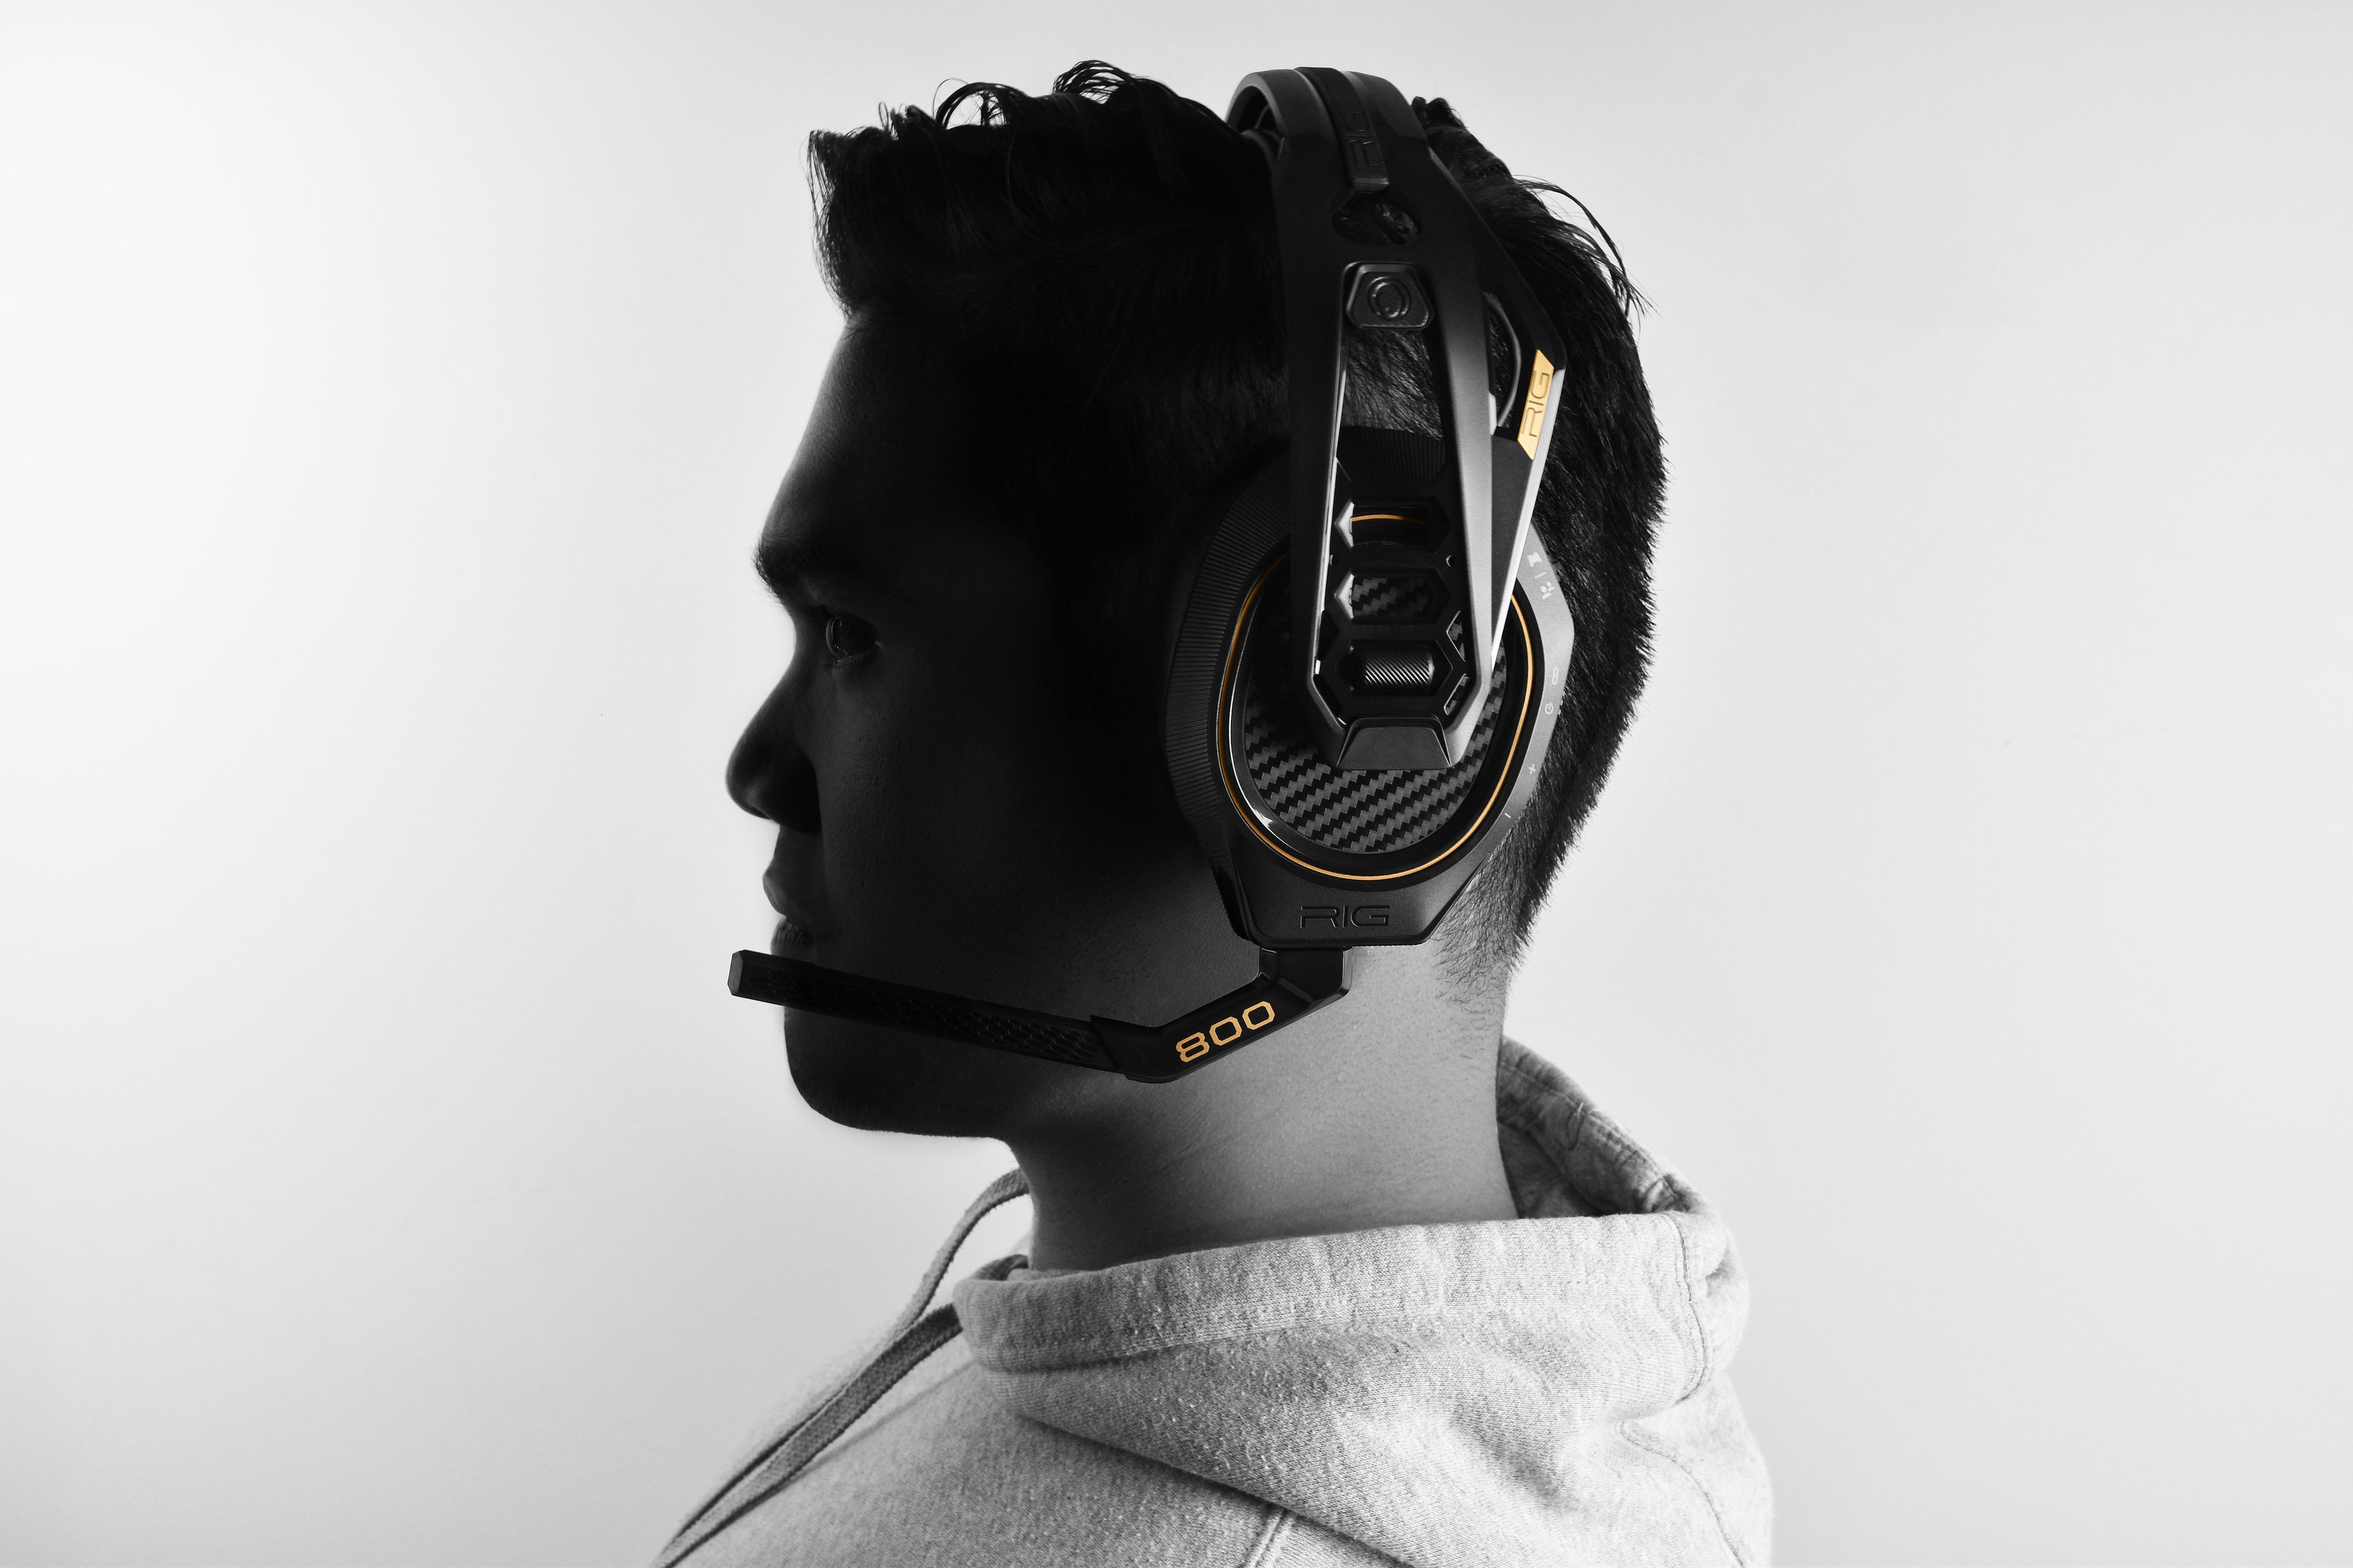 RIG 800 PRO Series headphones offer impressive sound quality and long battery life